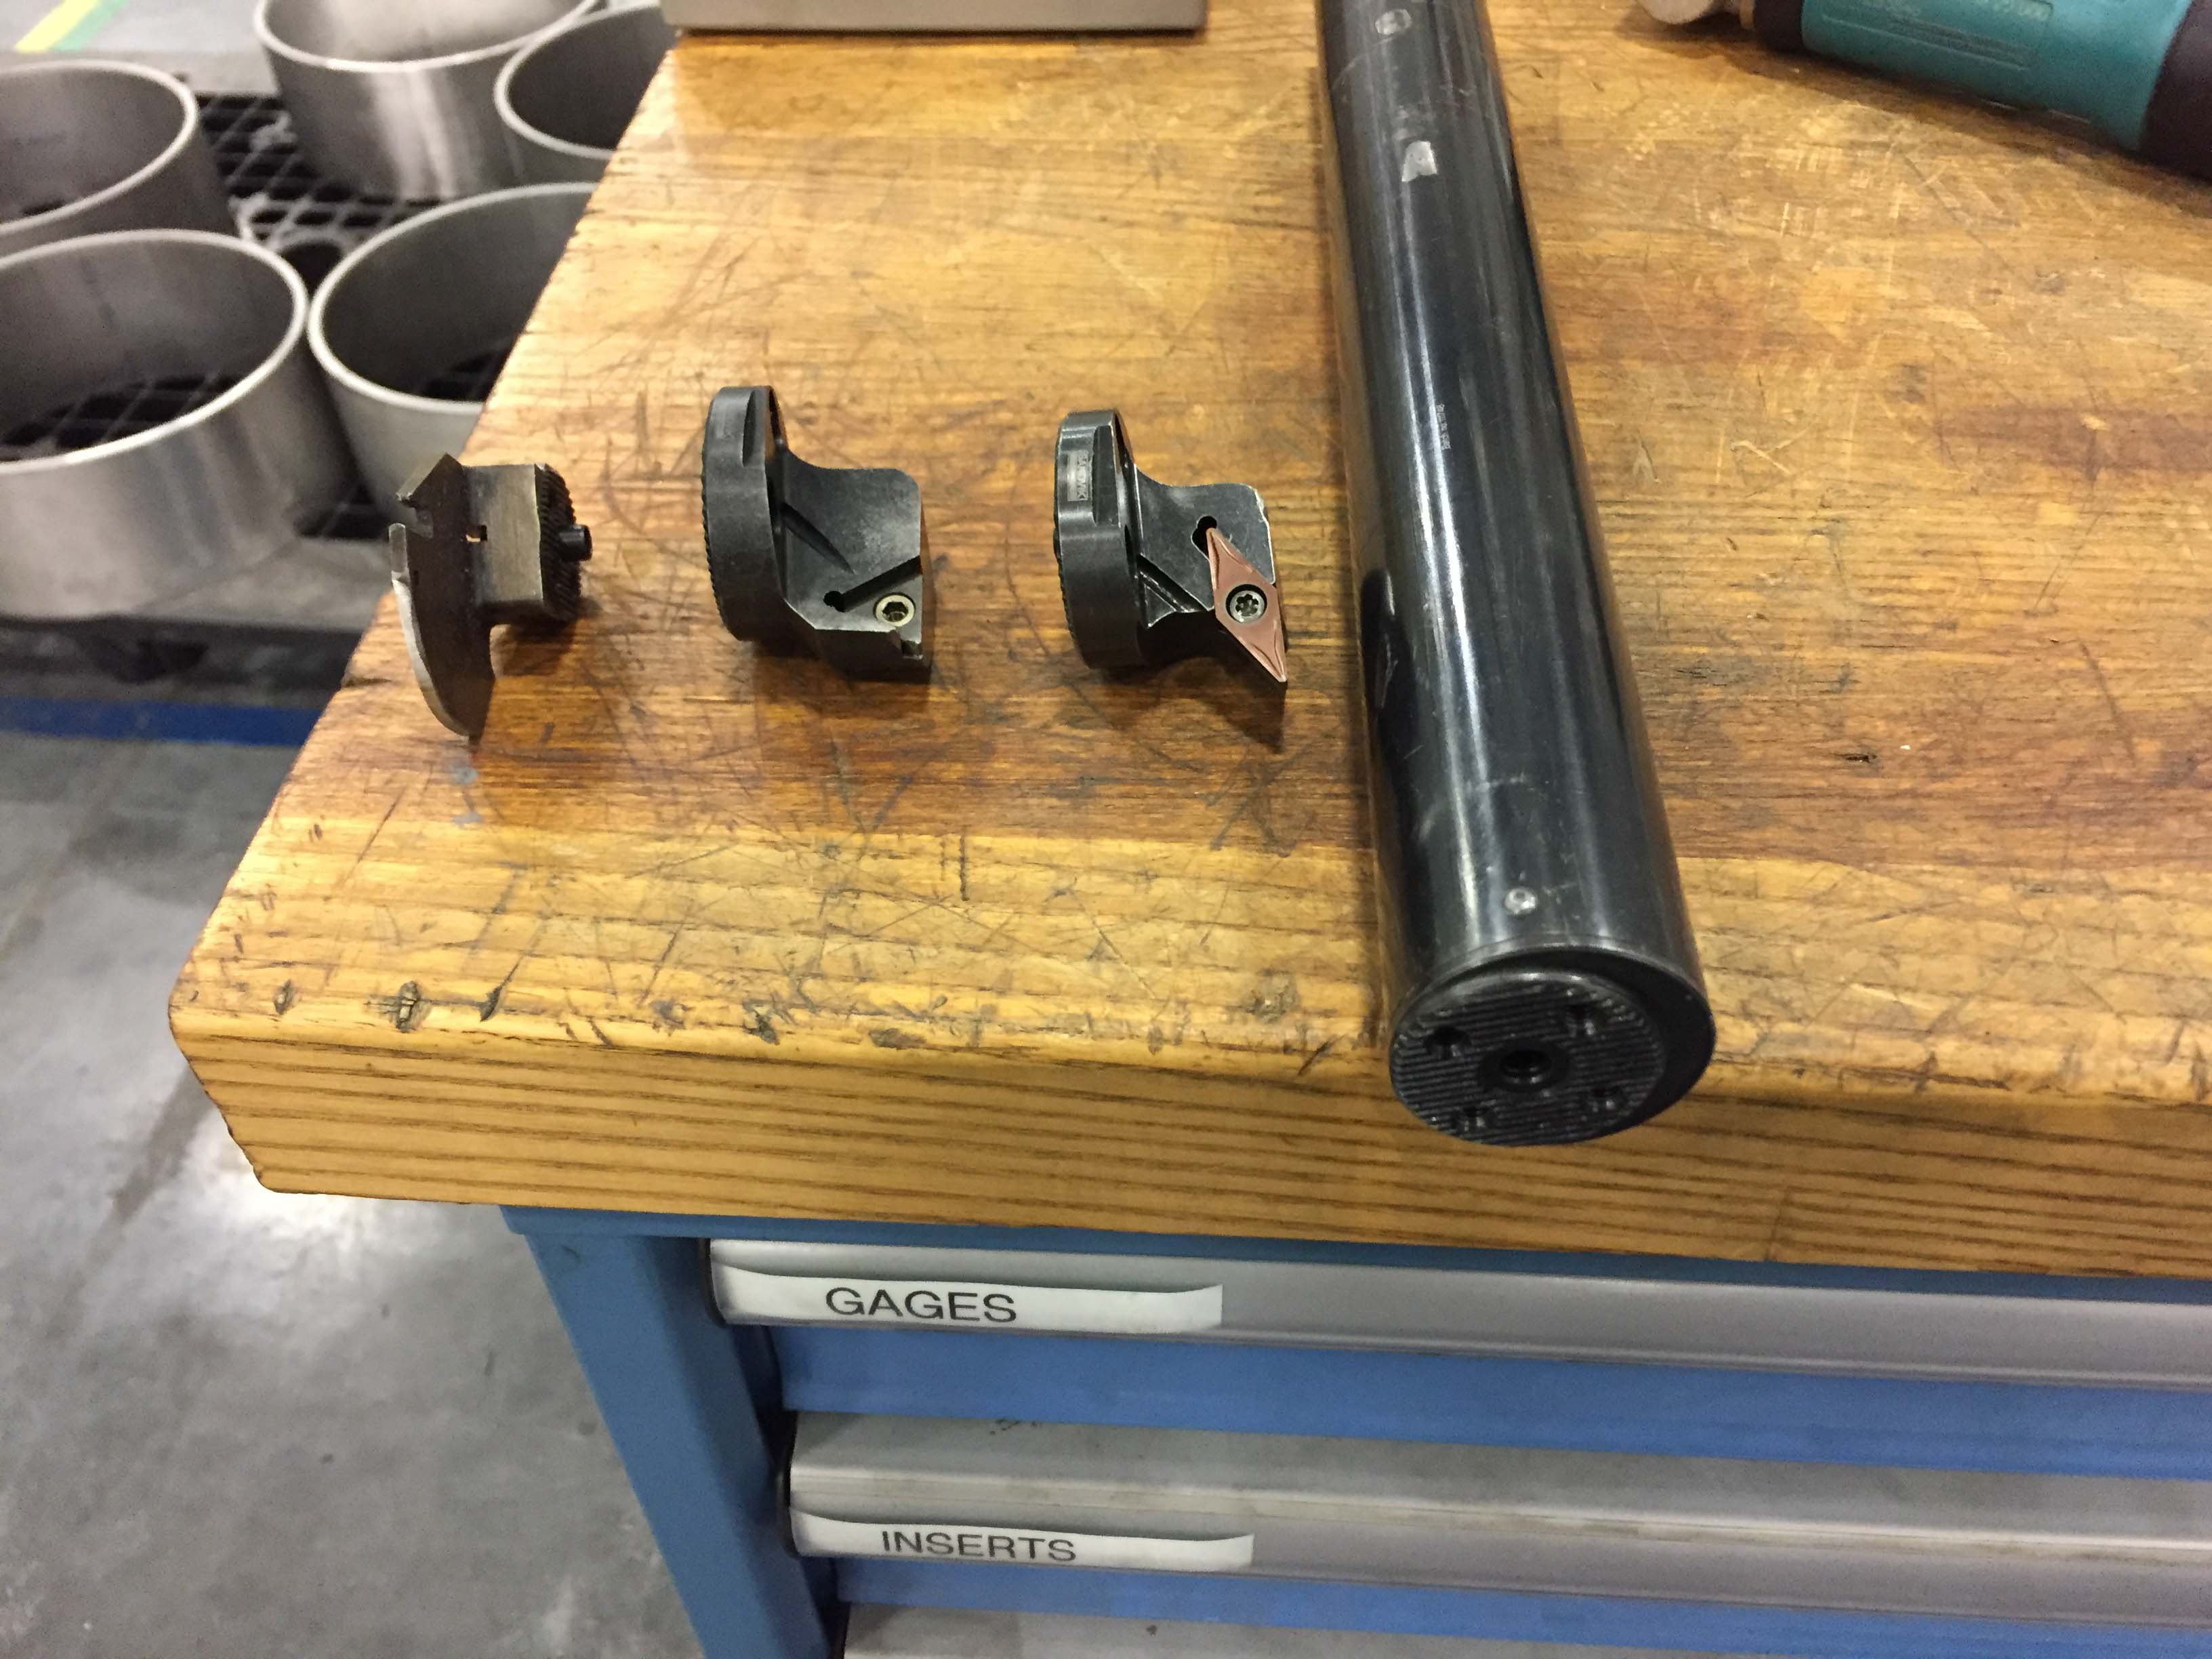 This small-diameter, vibration-damping bar has several cutting heads. Image courtesy of Christopher Tate.